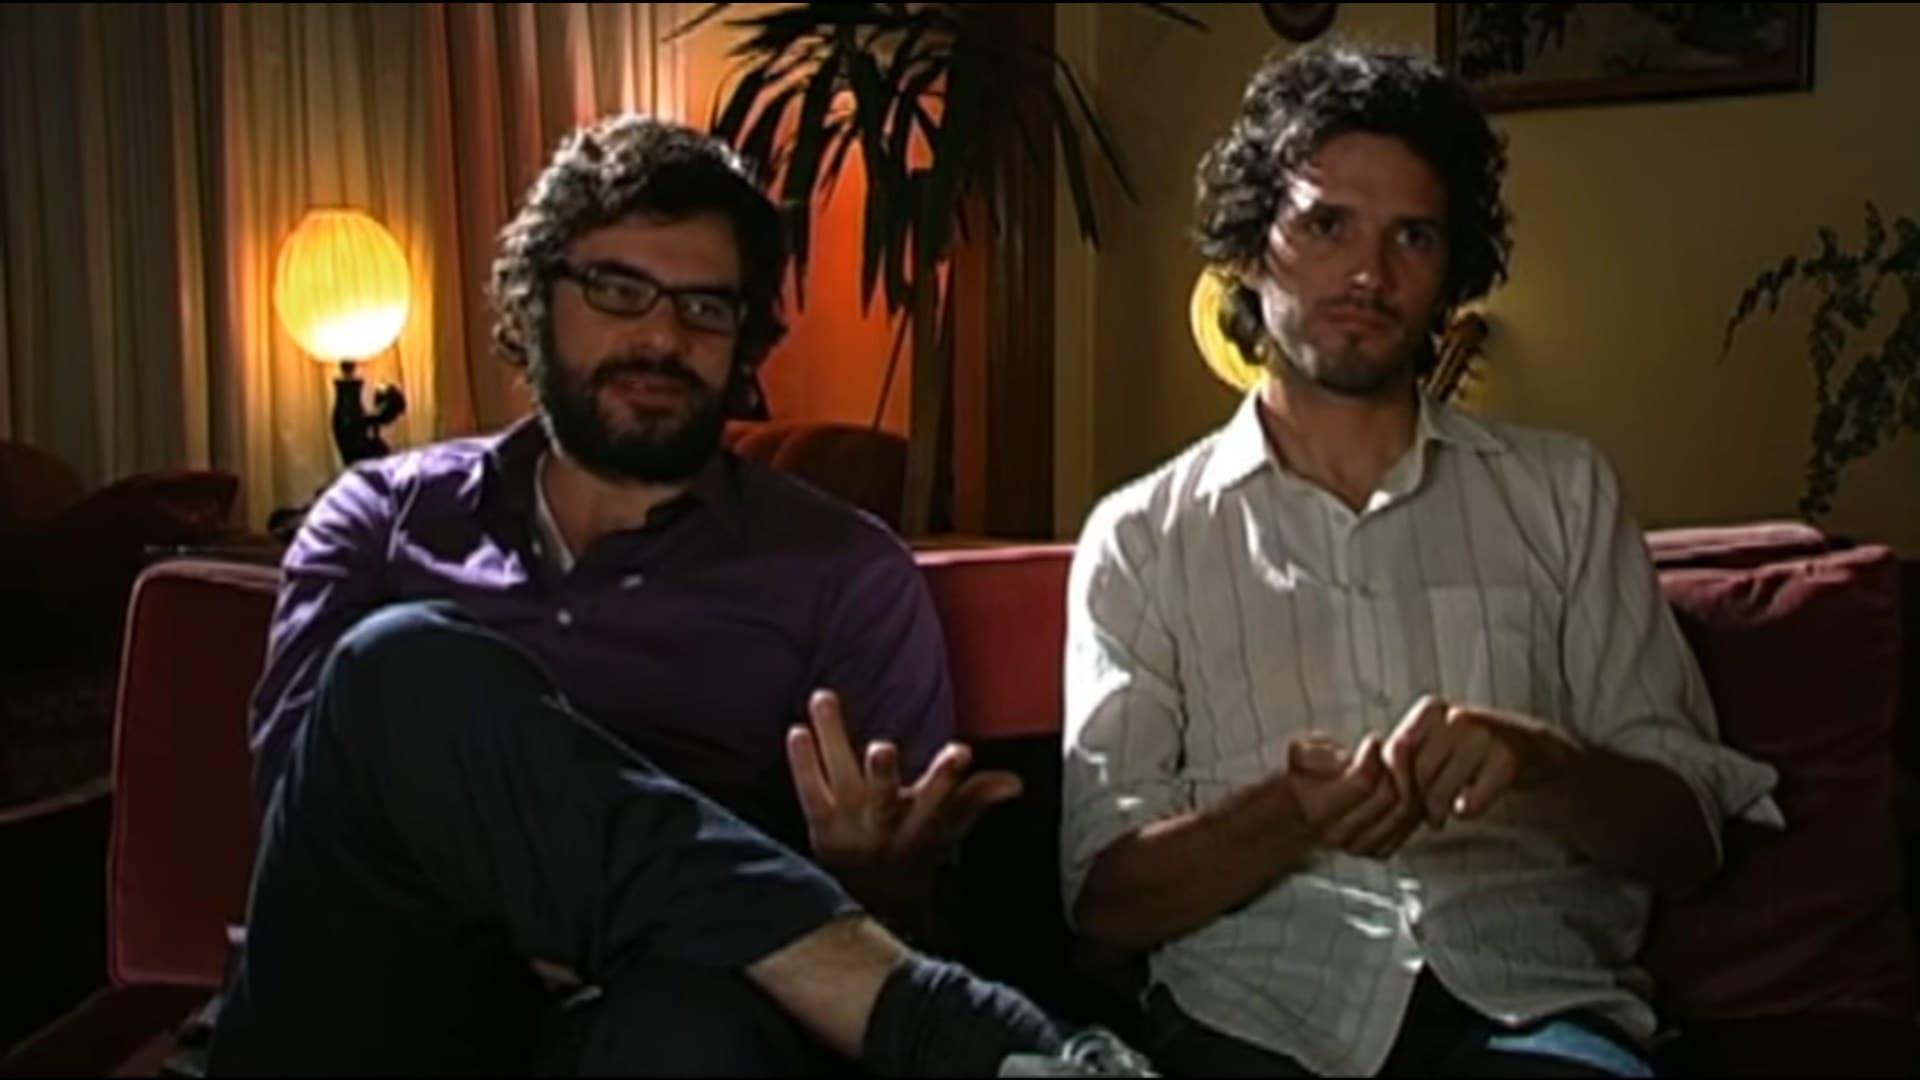 Flight of the Conchords: On Air backdrop